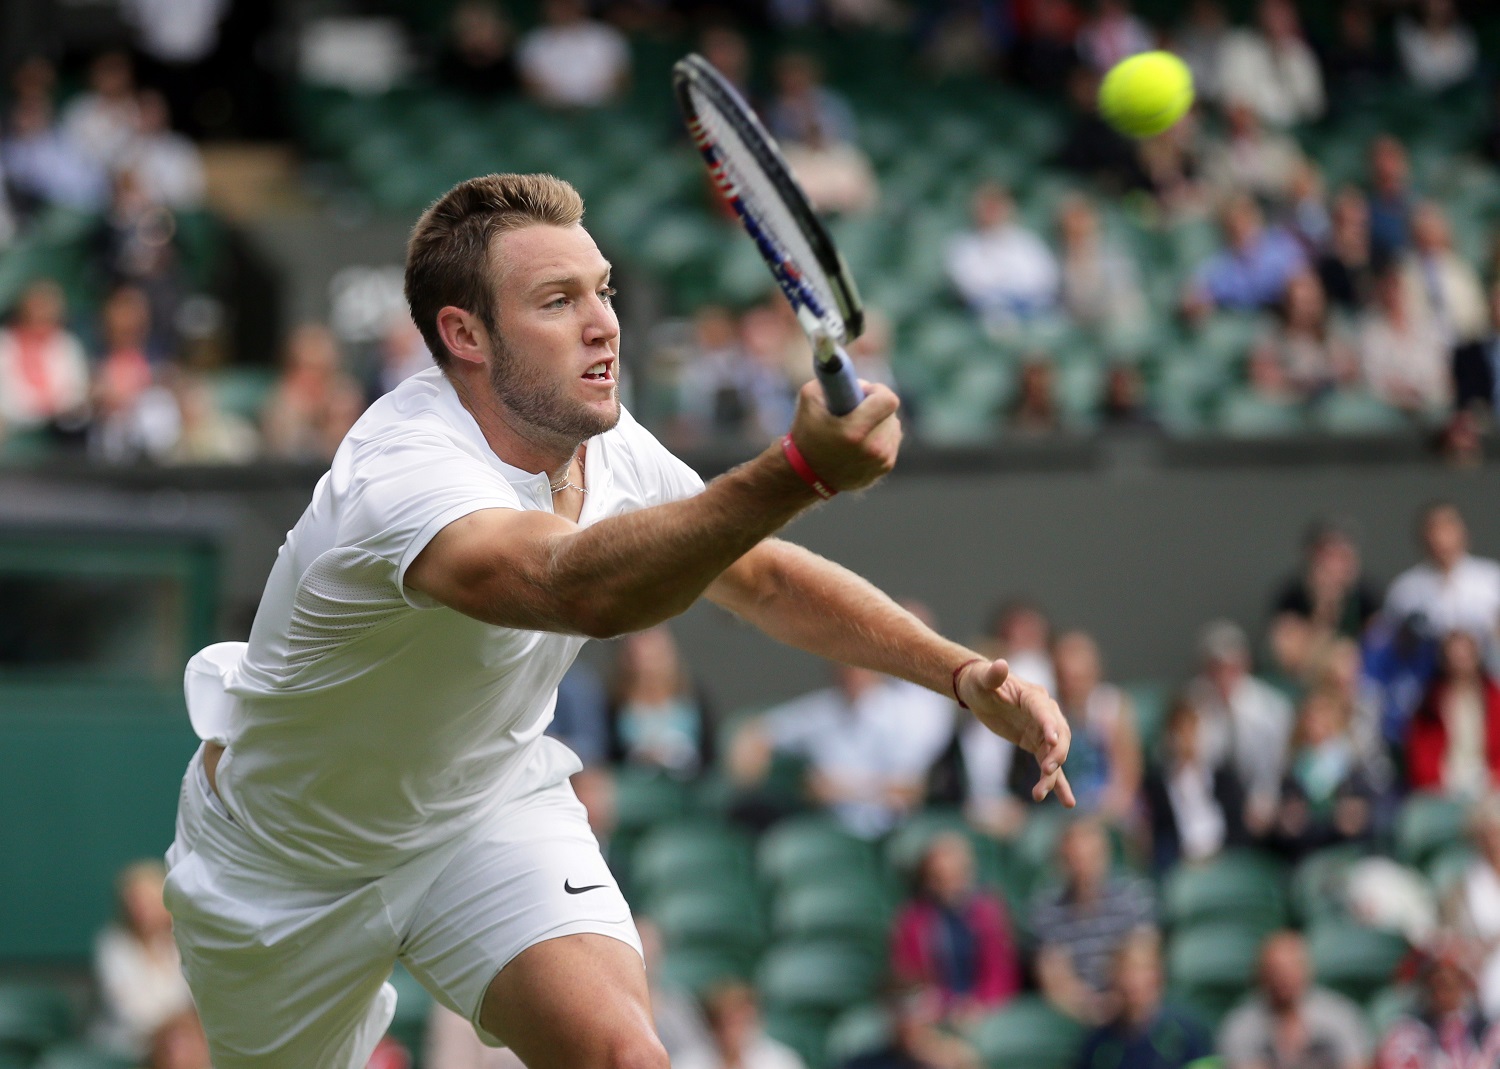 Jack Sock of the U.S returns to Milos Raonic of Canada during their men's singles match on day six of the Wimbledon Tennis Championships in London, Saturday, July 2, 2016. (AP Photo/Tim Ireland)